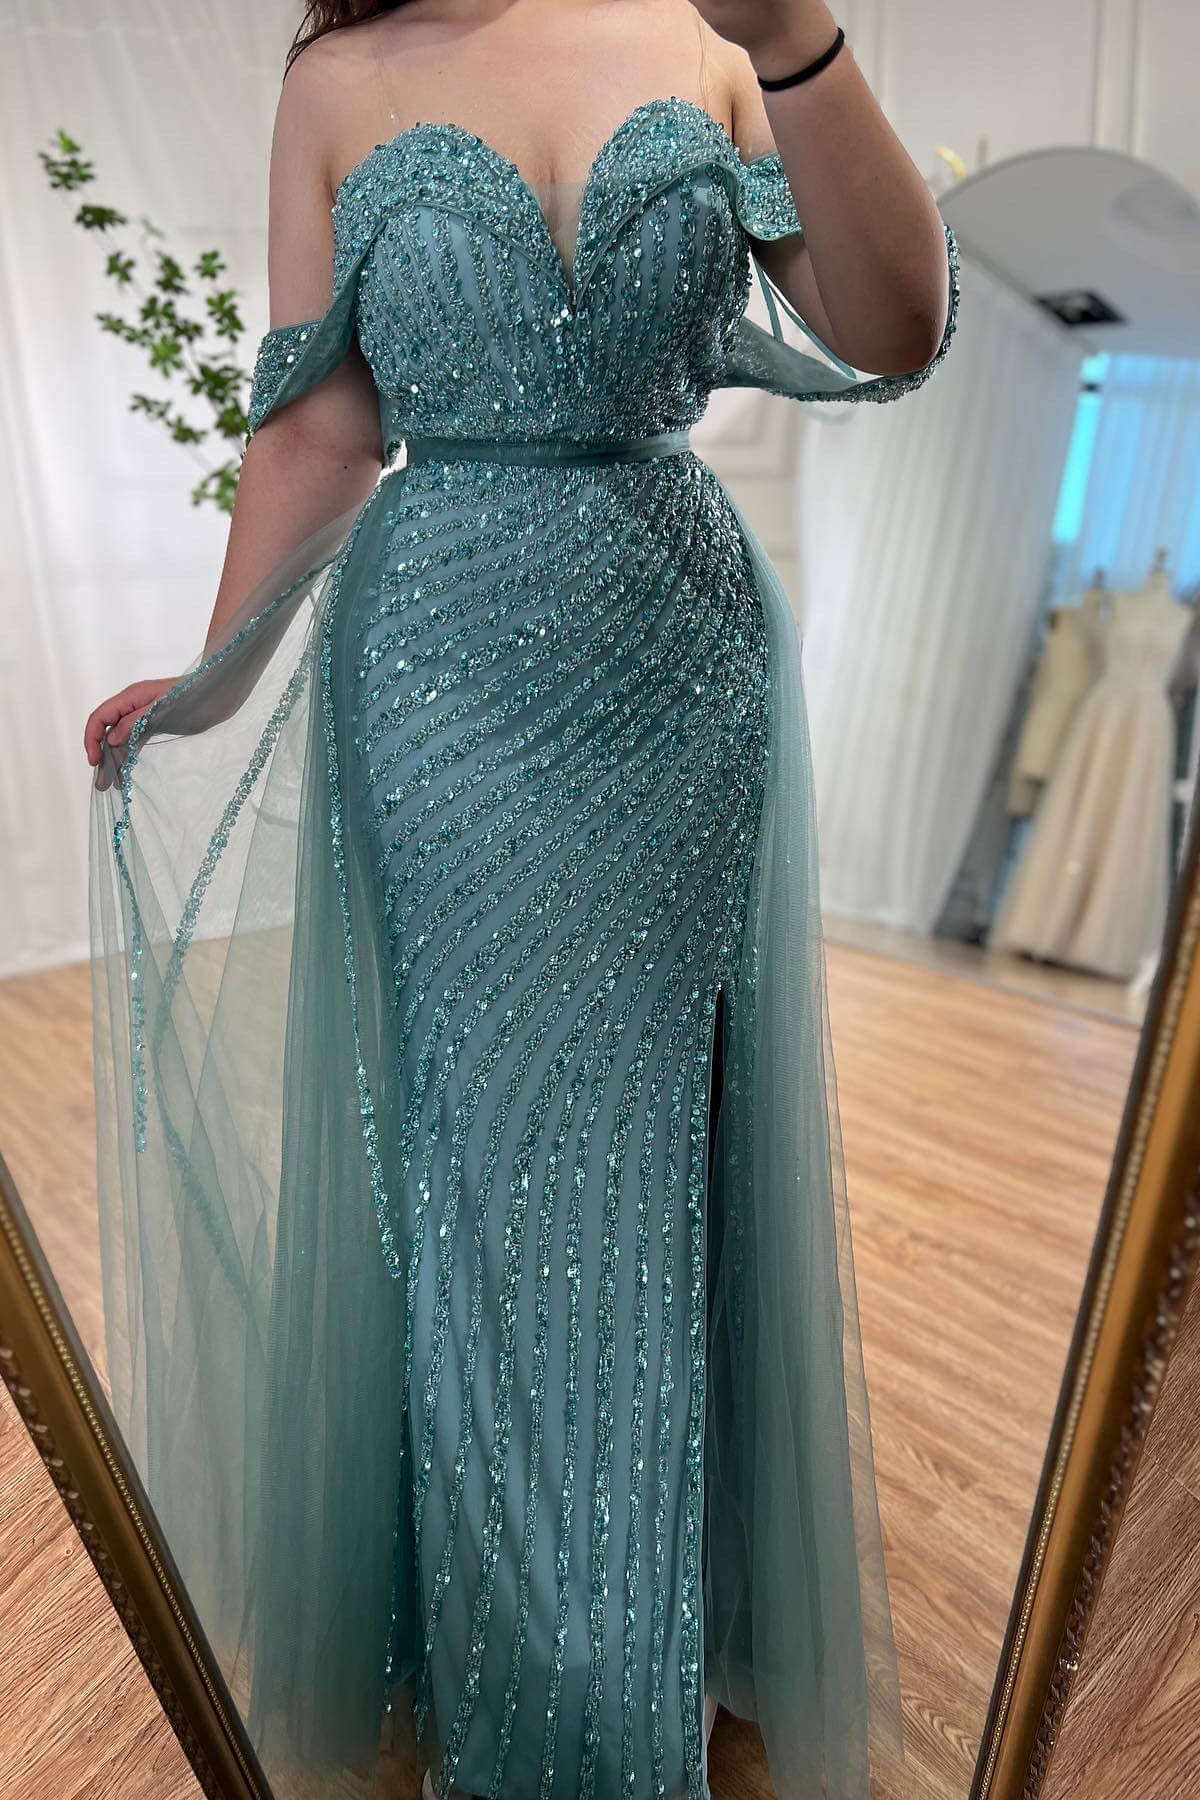 Luxury Jade Off-the-Shoulder Evening Gowns Mermaid Beadings With Tulle Overskirt - lulusllly